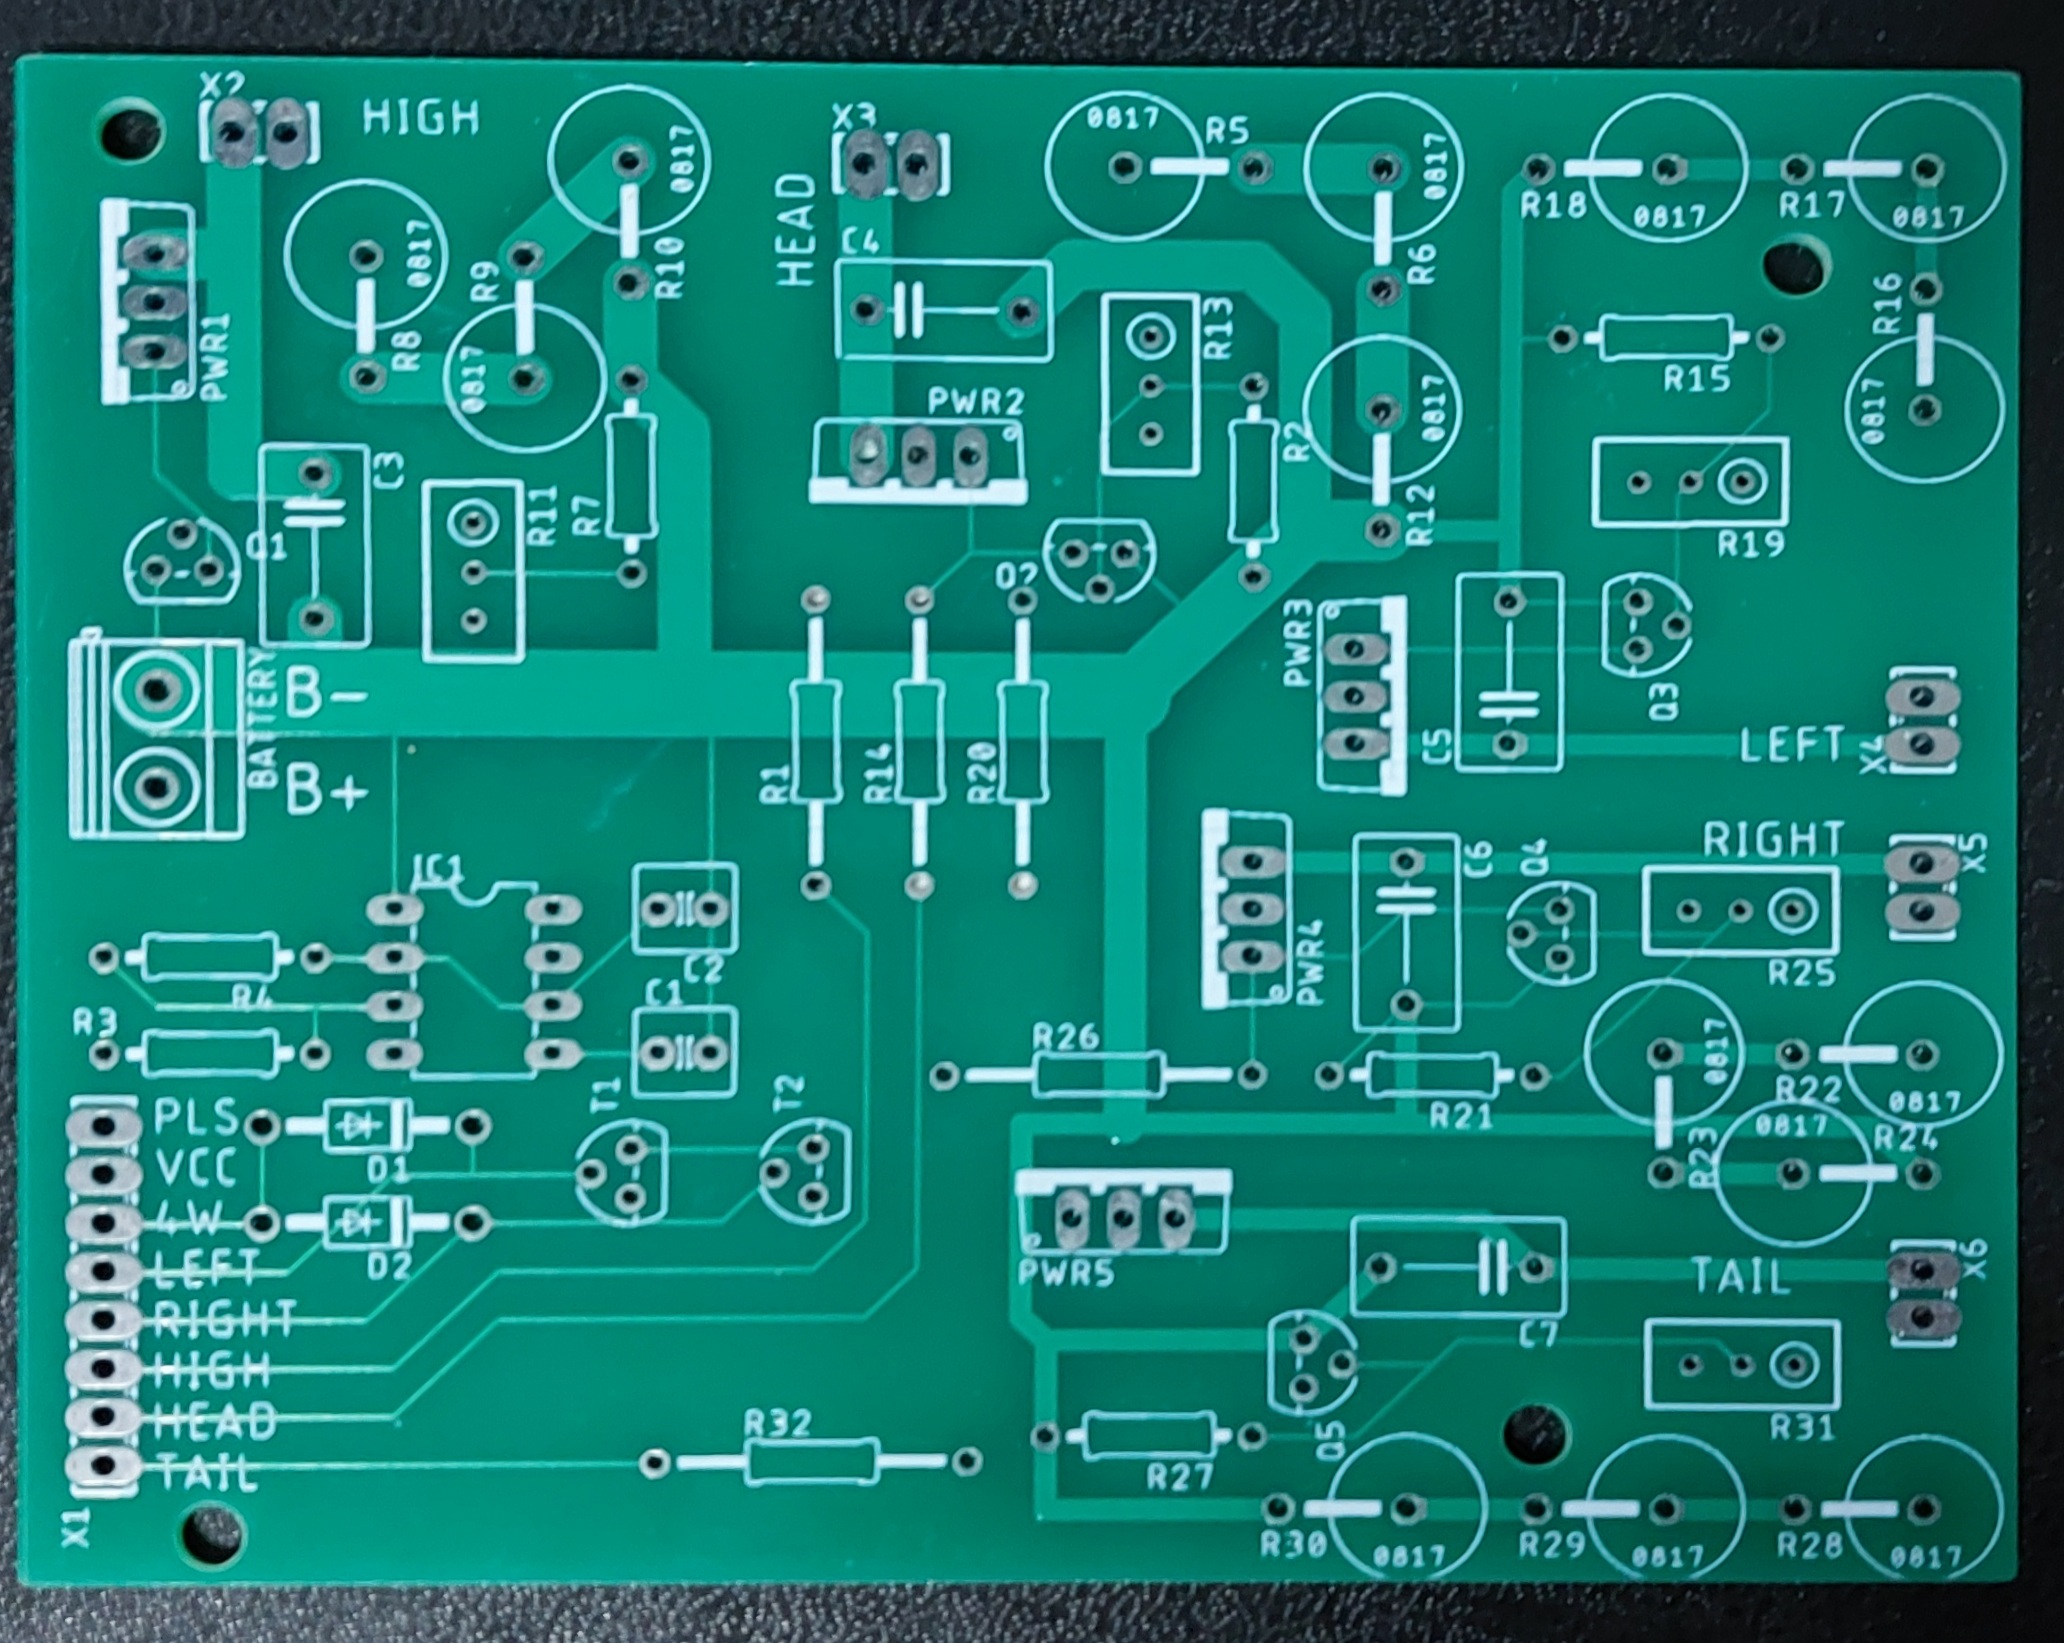 The produced circuit board